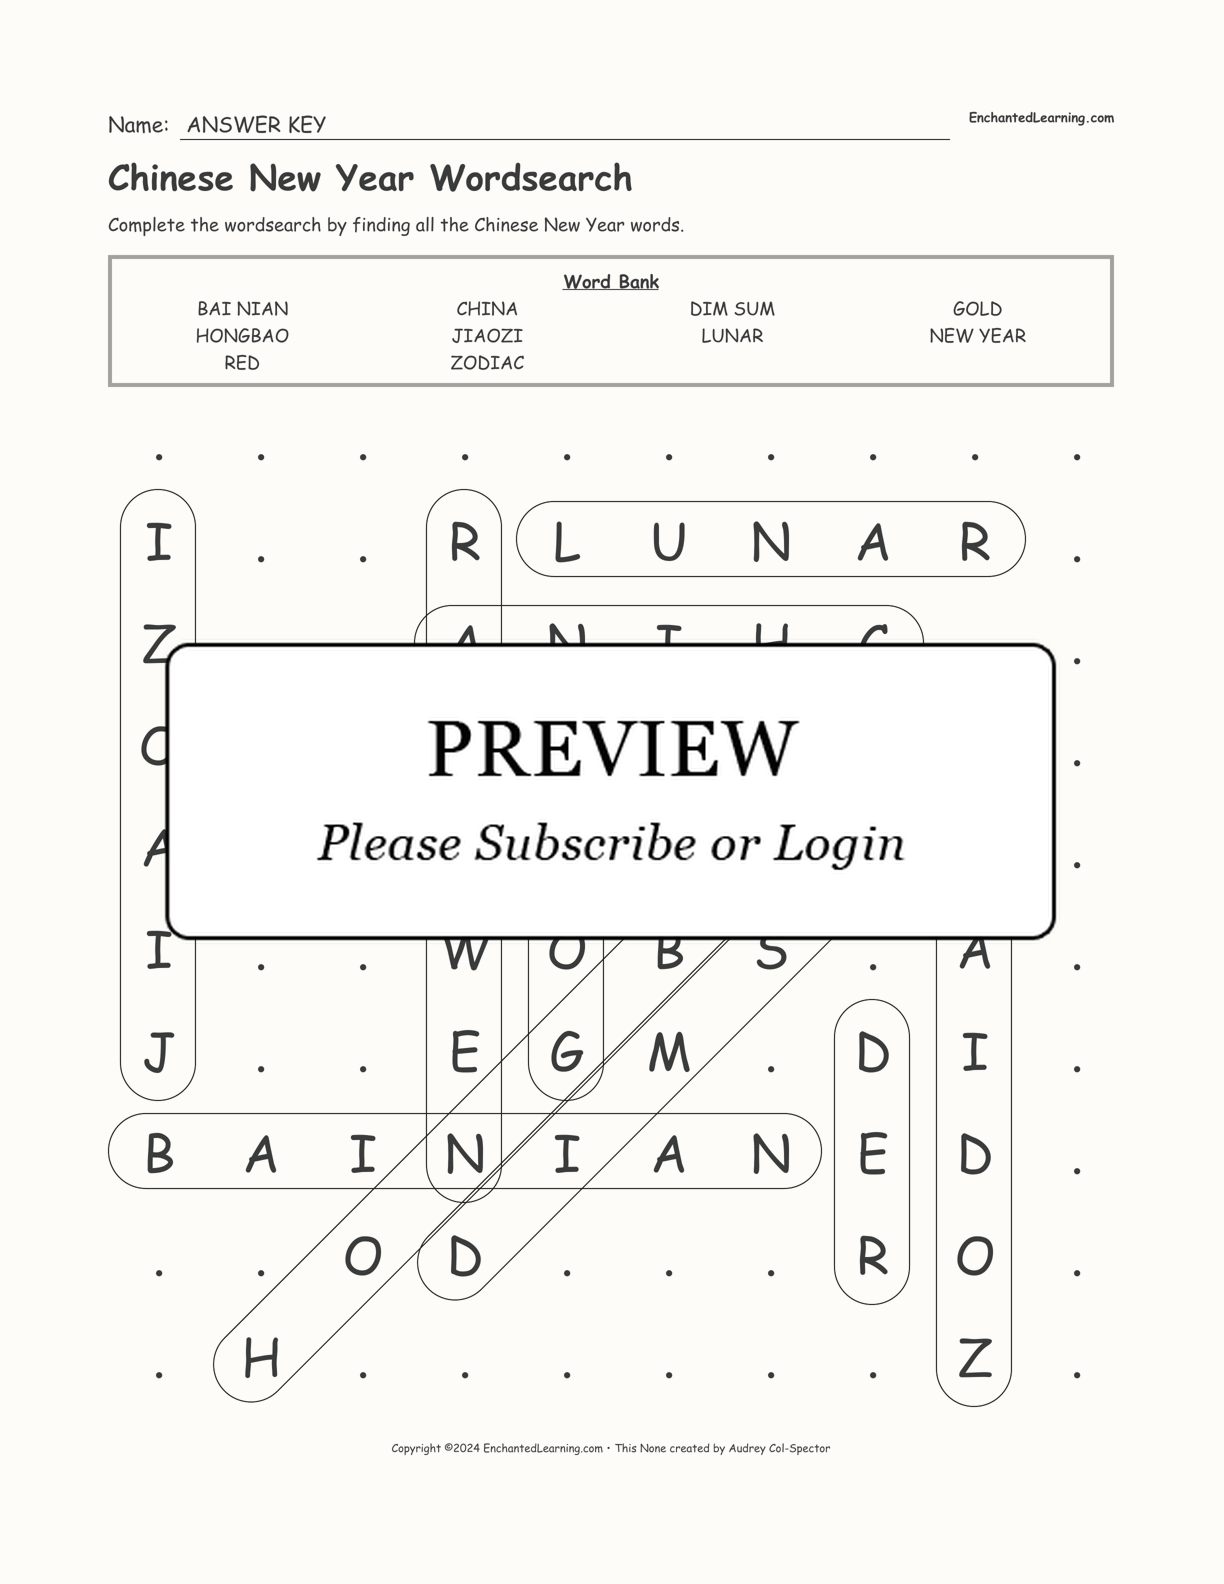 Chinese New Year Wordsearch interactive worksheet page 2